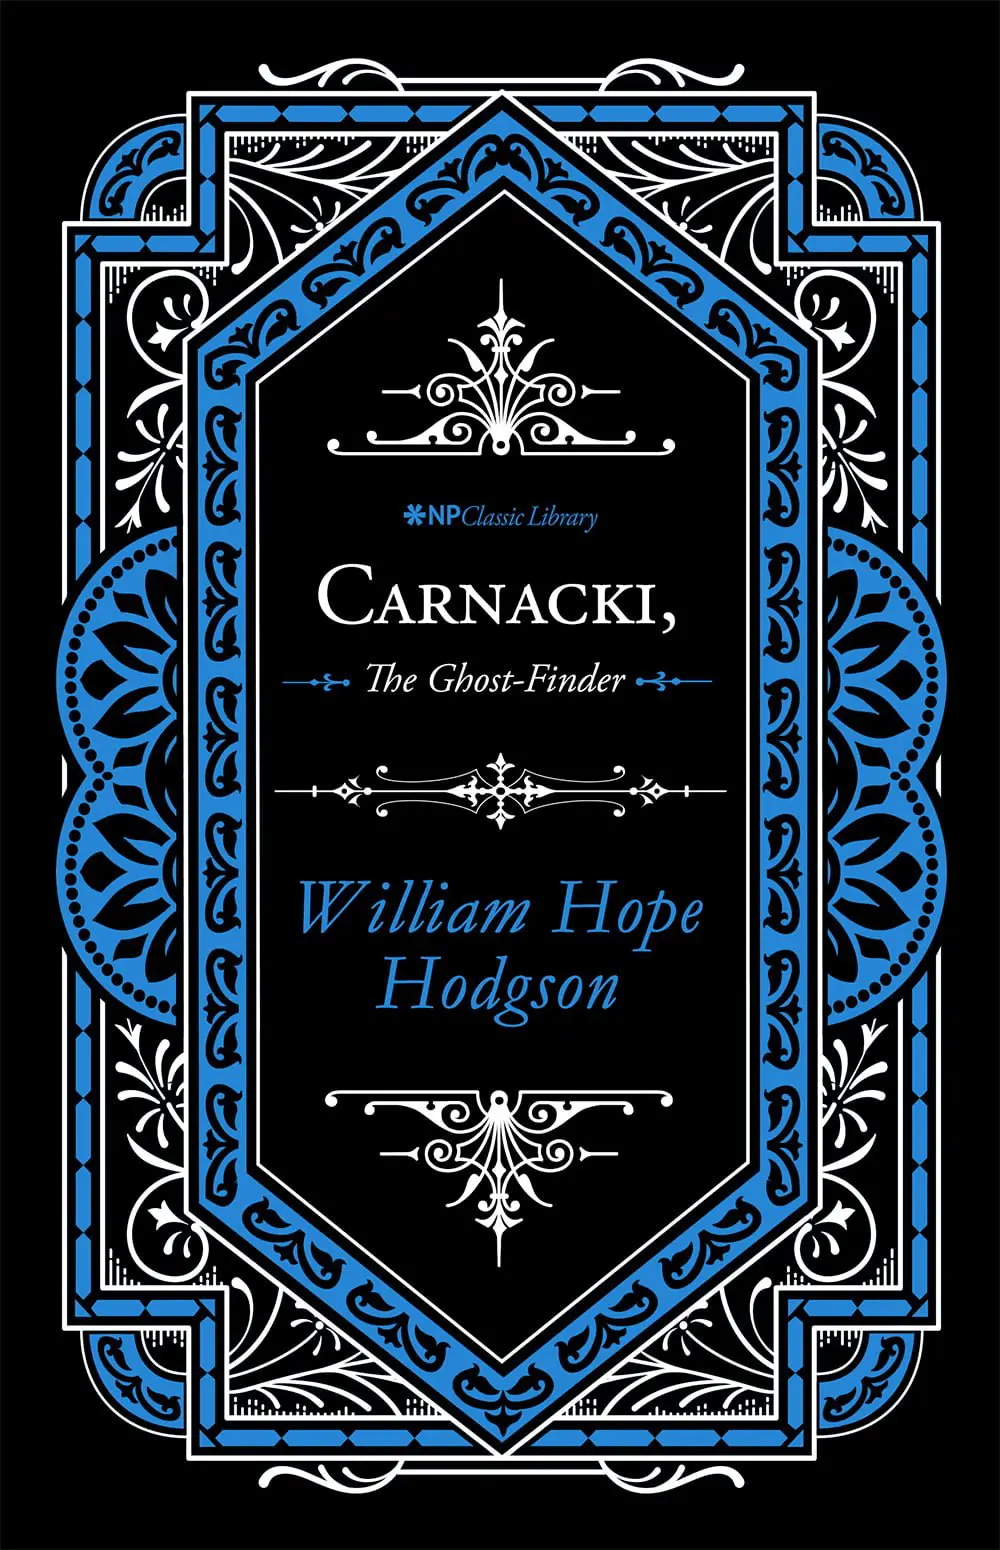 Carnacki, The Ghost-Finder